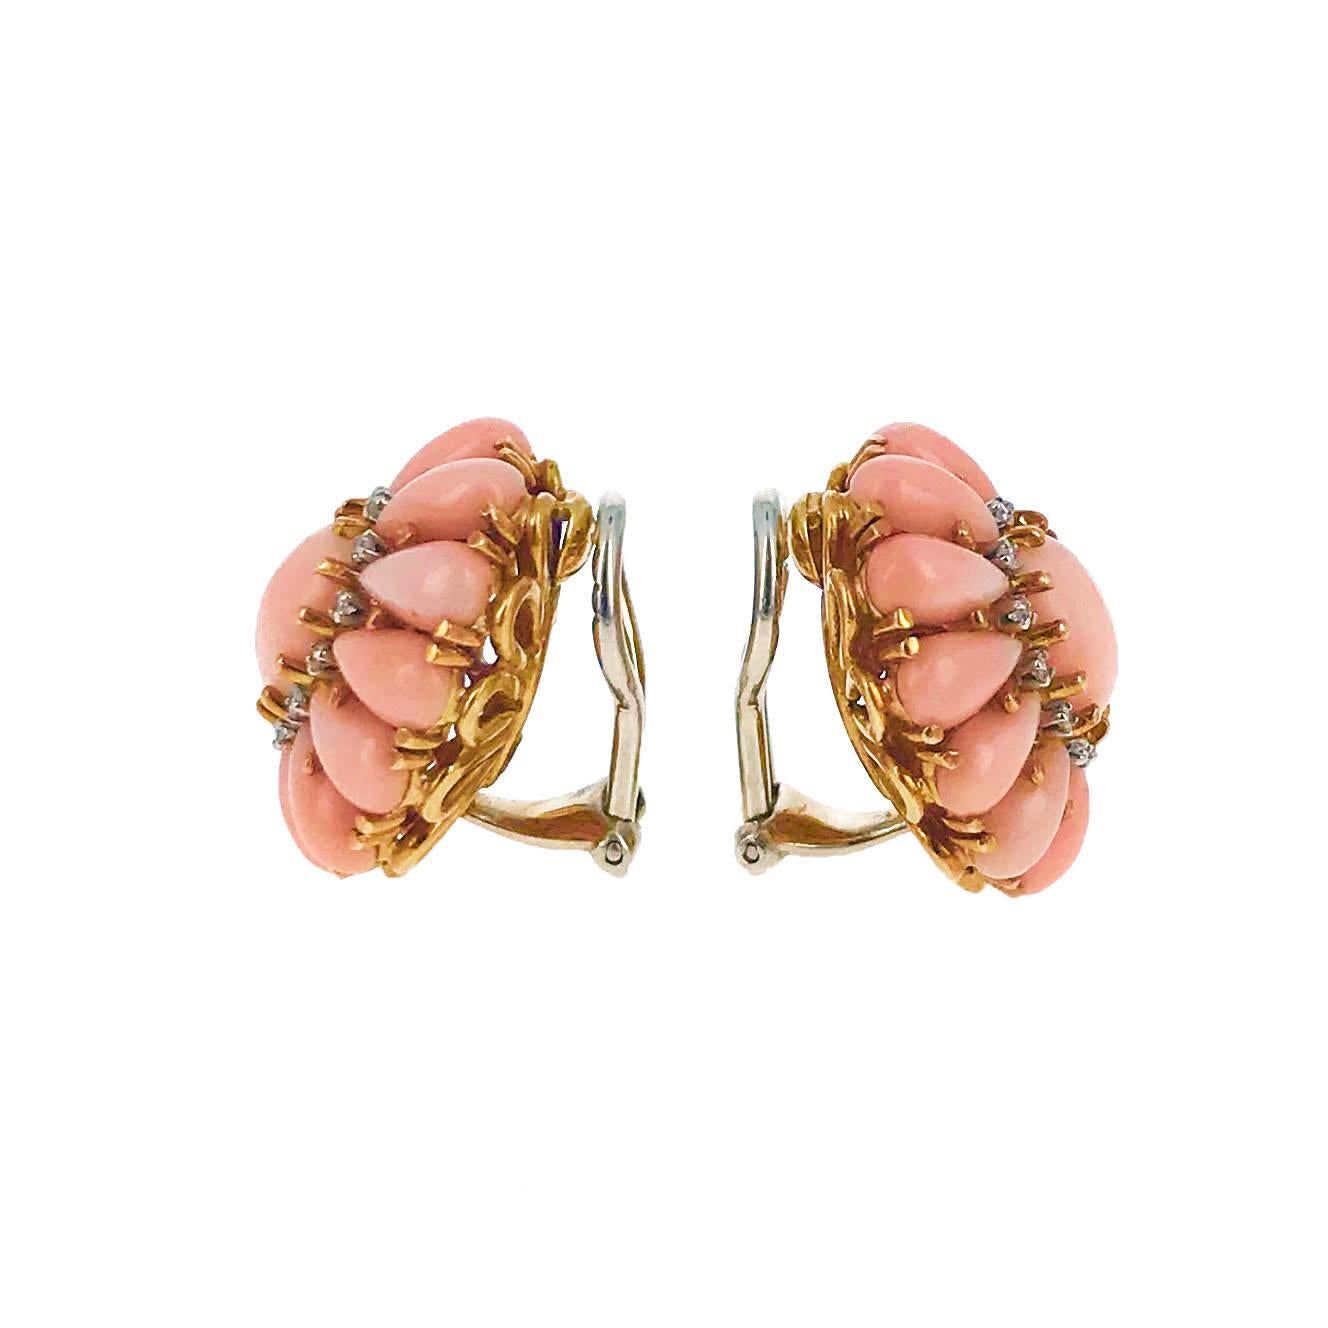 This pair of ear clips features oval cabochon angel skin coral surrounded by tear drop shaped cabochon coral and accented with round diamonds. The clip earrings are mounted in 18 karat yellow gold and were made circa 1950.